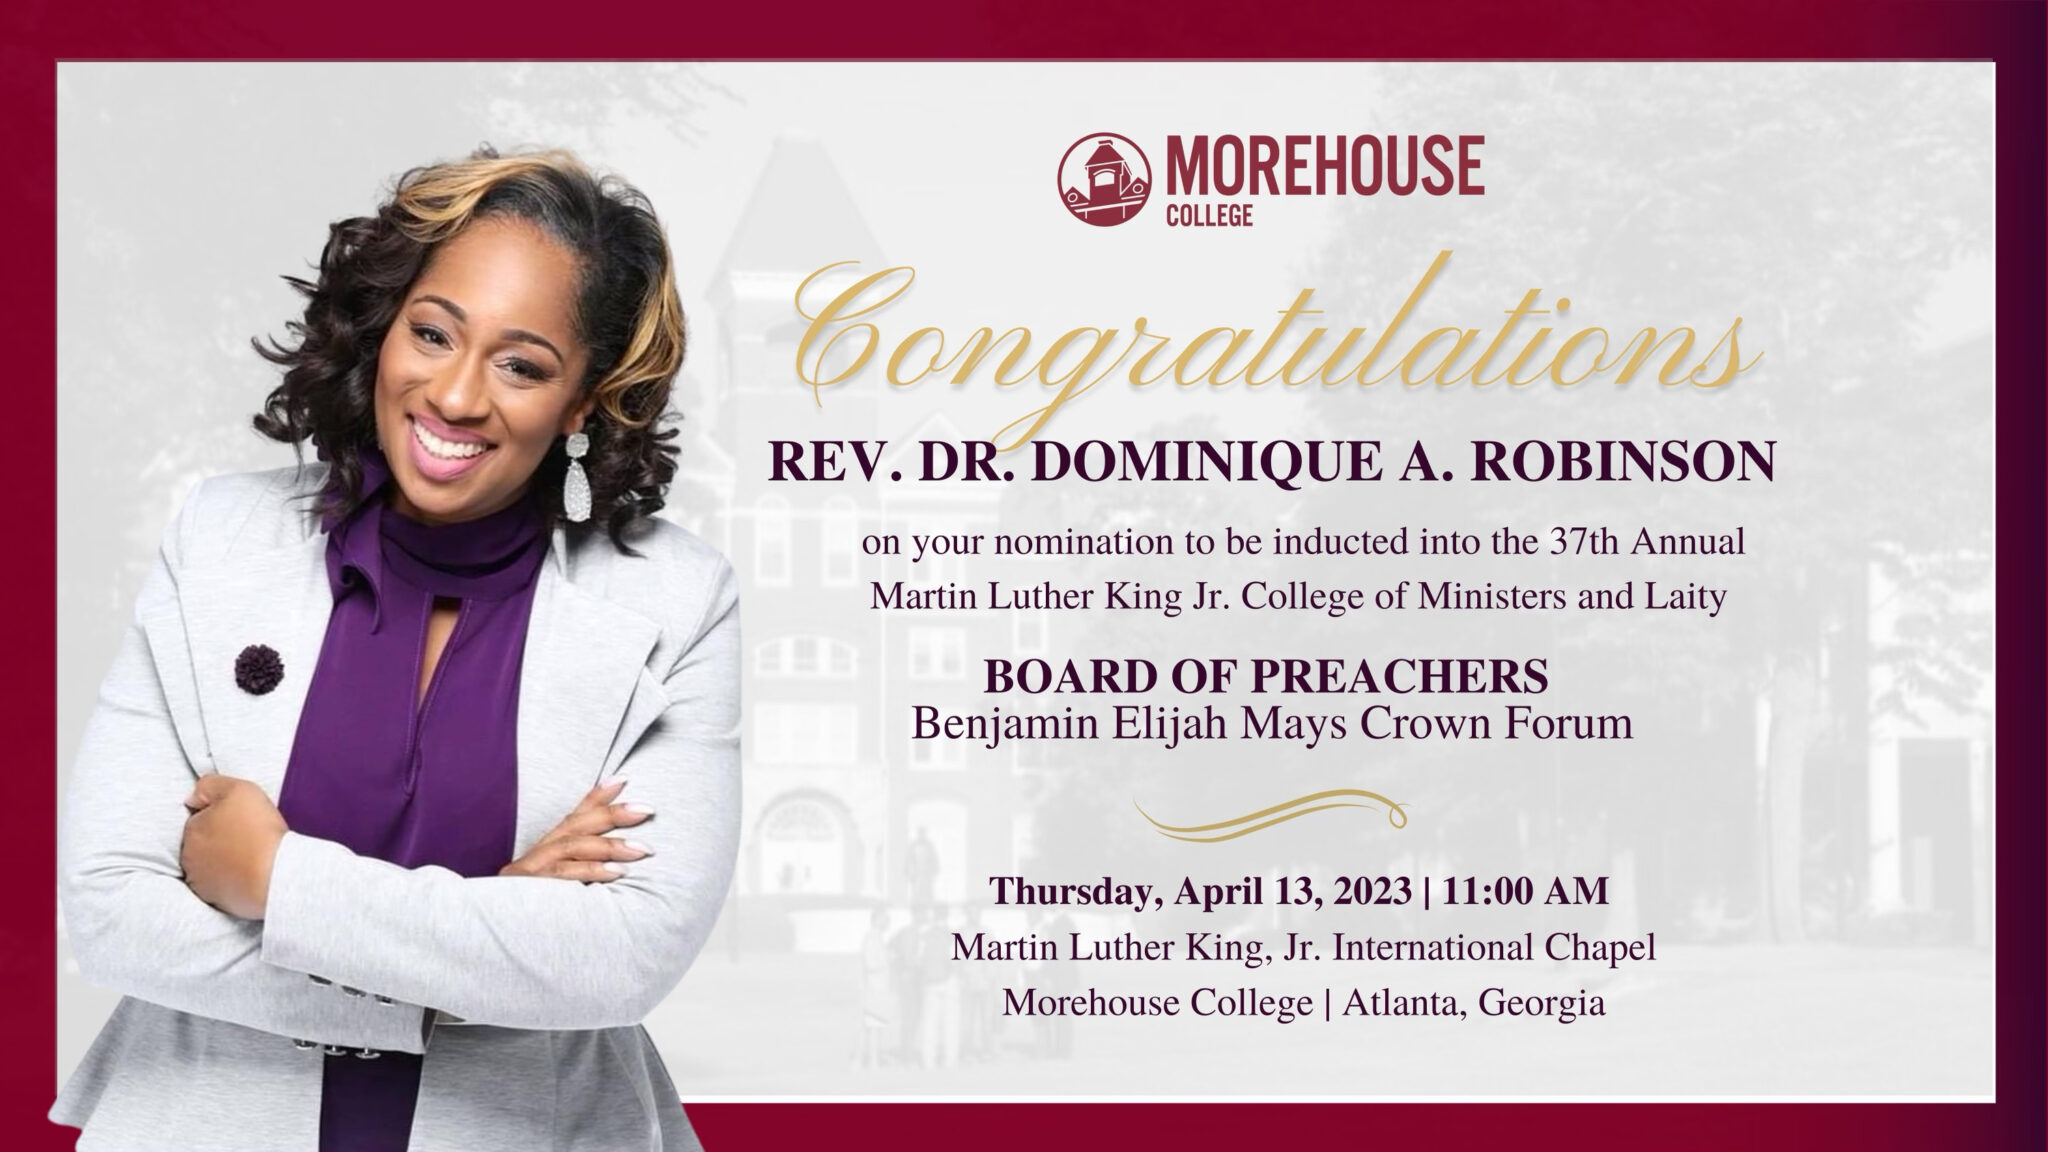 Rev. Dr. Dominique Robinson to be inaugurated into the Morehouse